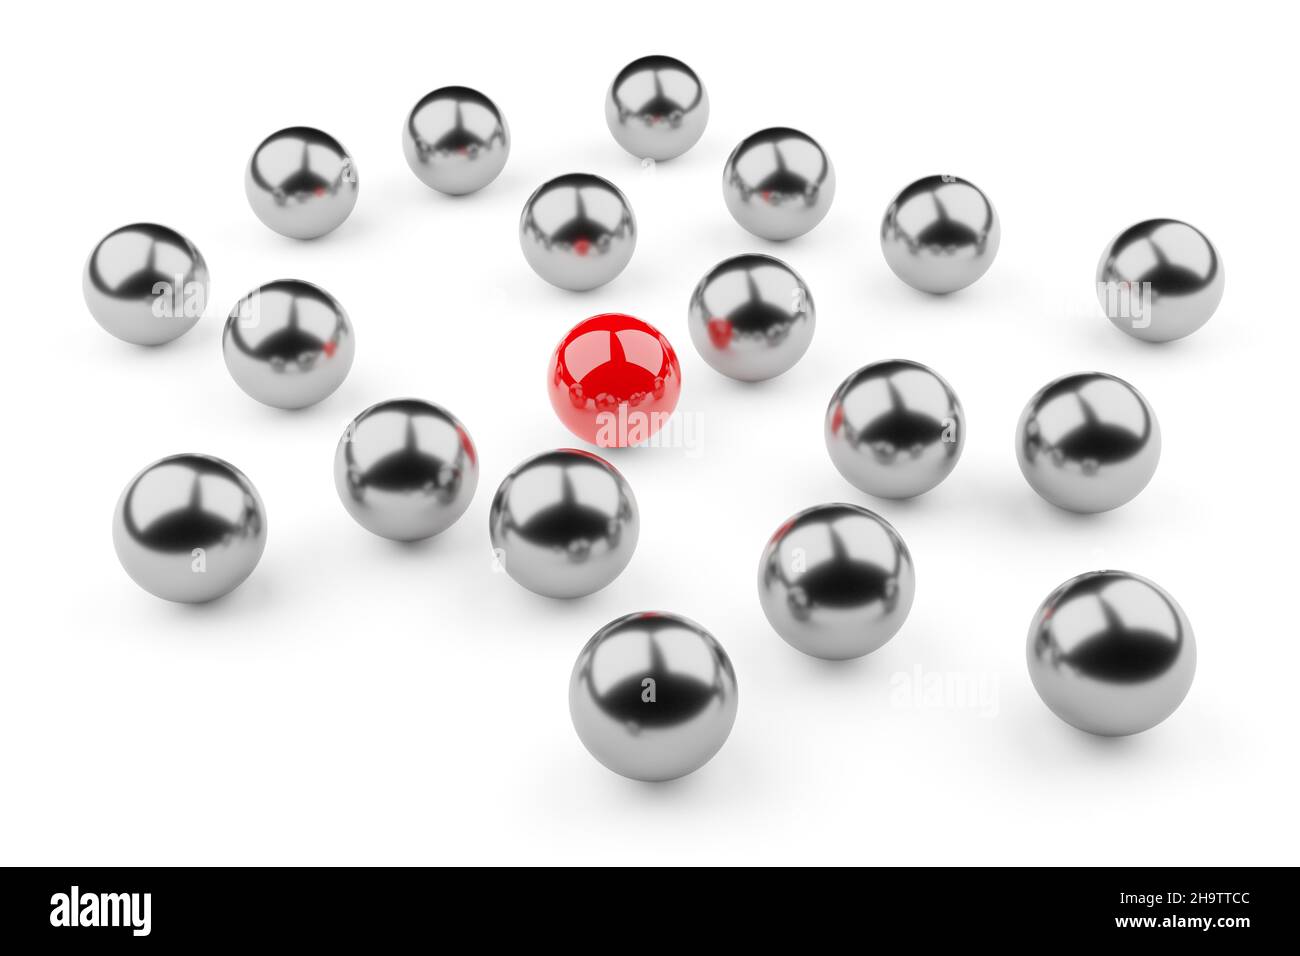 Single red sphere in the middle of group or team of silver spheres over white background, team, leadership or individuality concept, 3d illustration Stock Photo